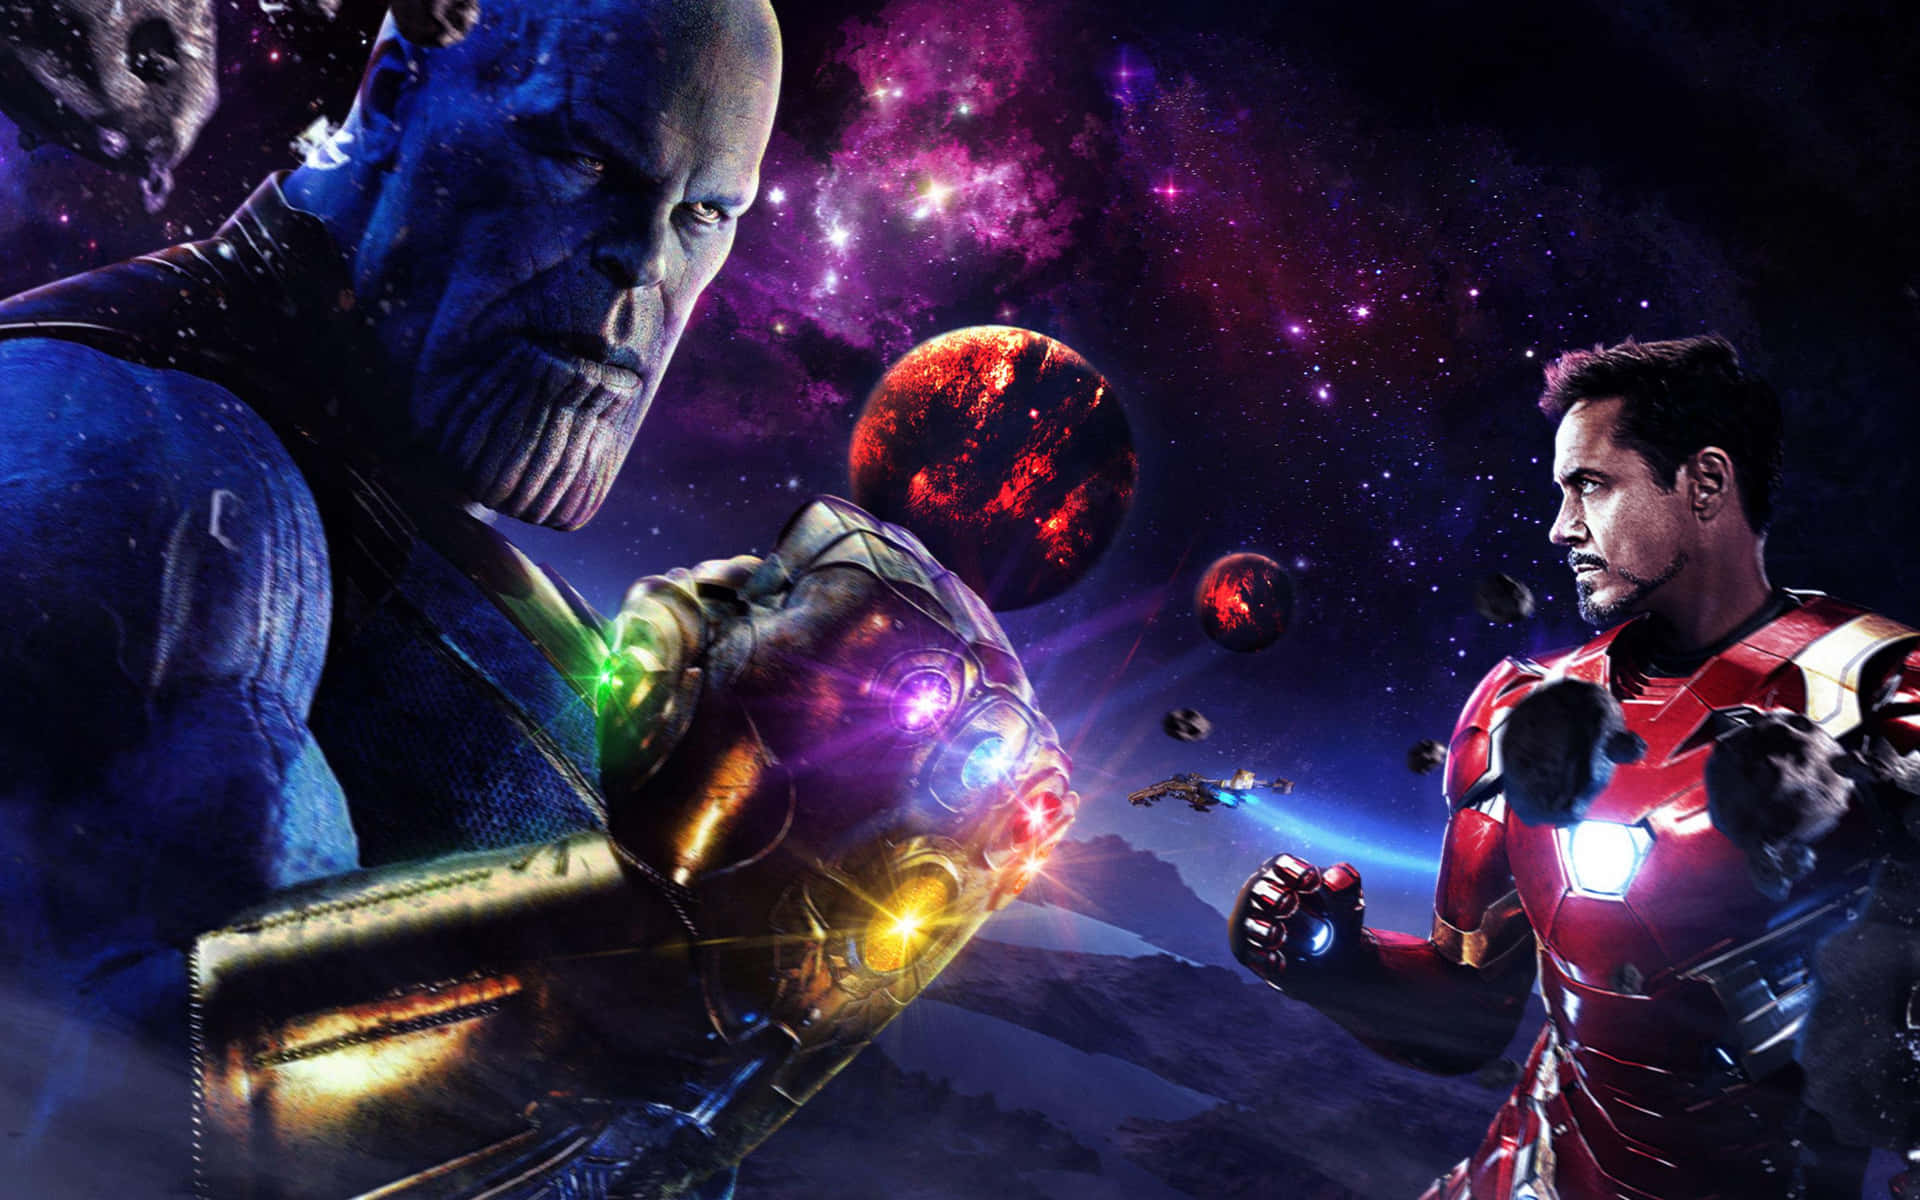 Two of the biggest superheroes in the Marvel Universe, Iron Man and Thanos, face off in an epic clash. Wallpaper